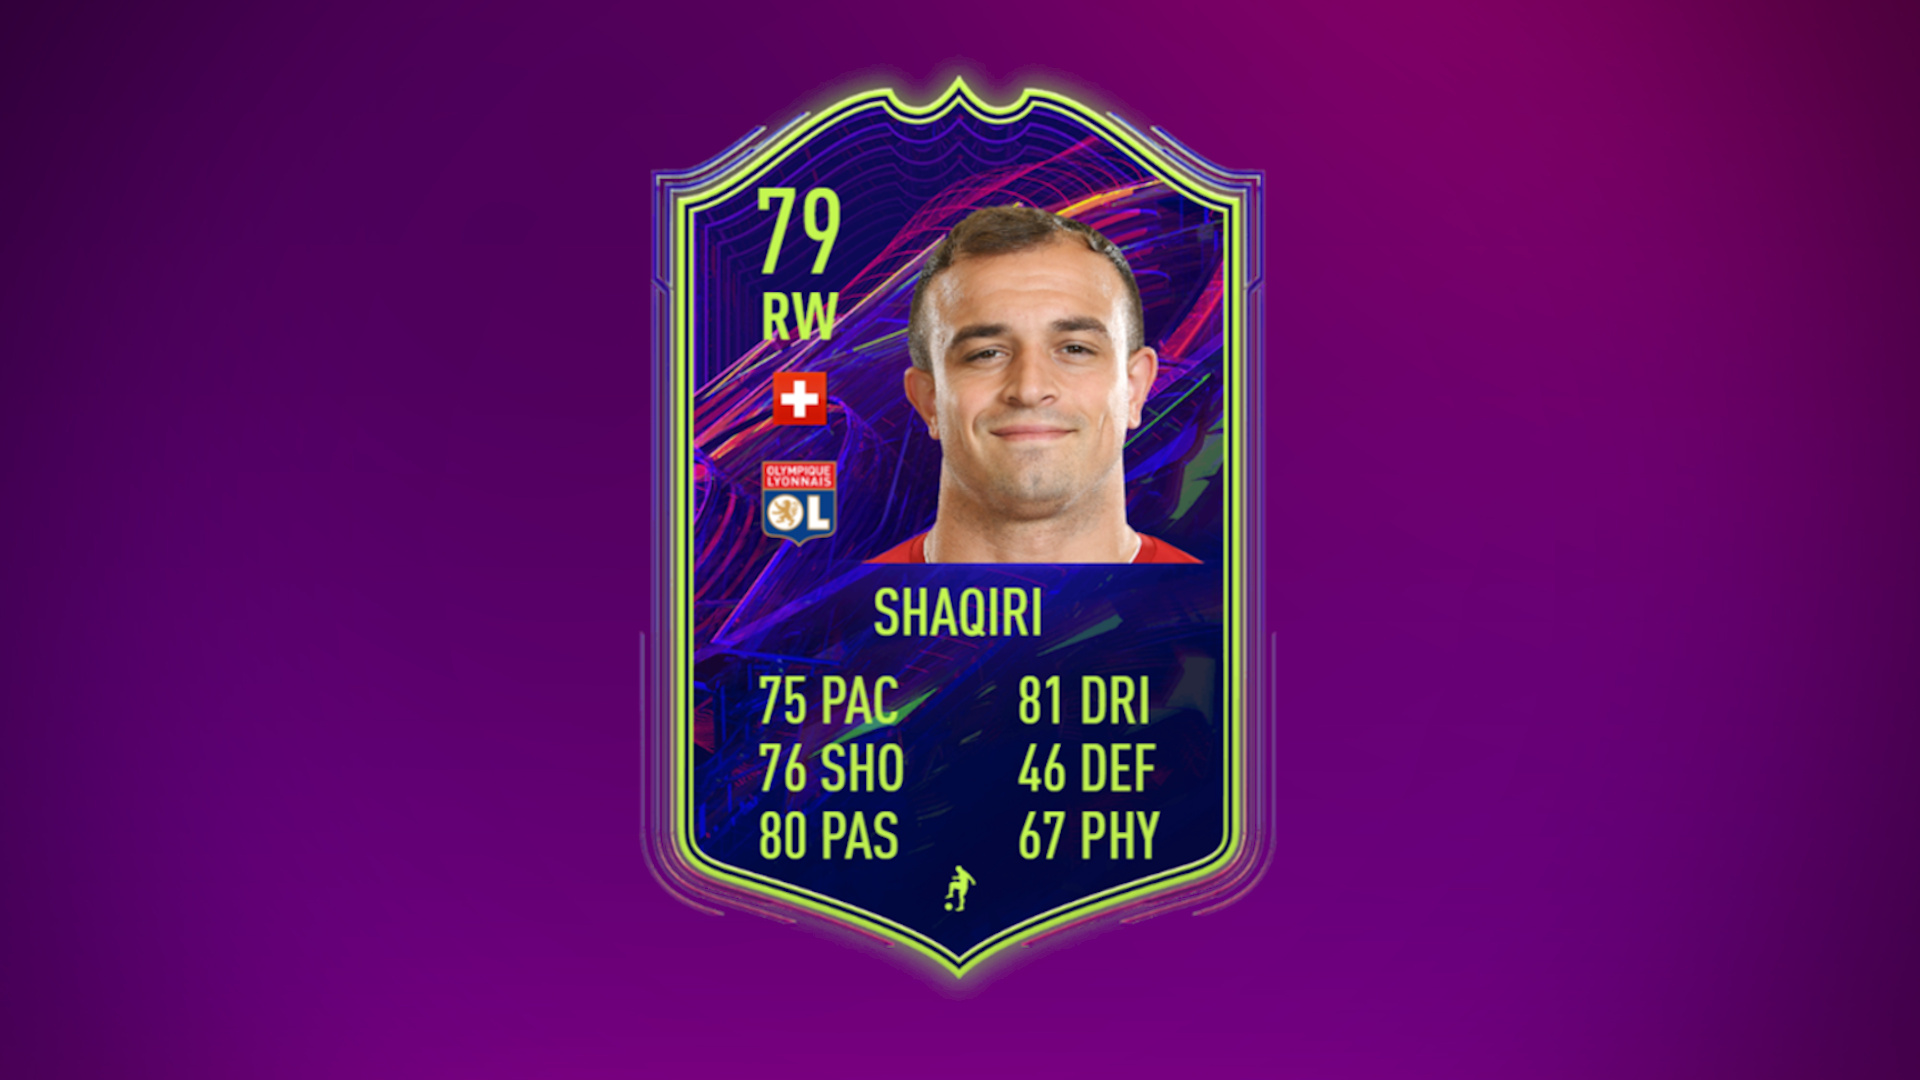 FIFA 22 Shaqiri SBC solution: his one to watch card on a purple background.